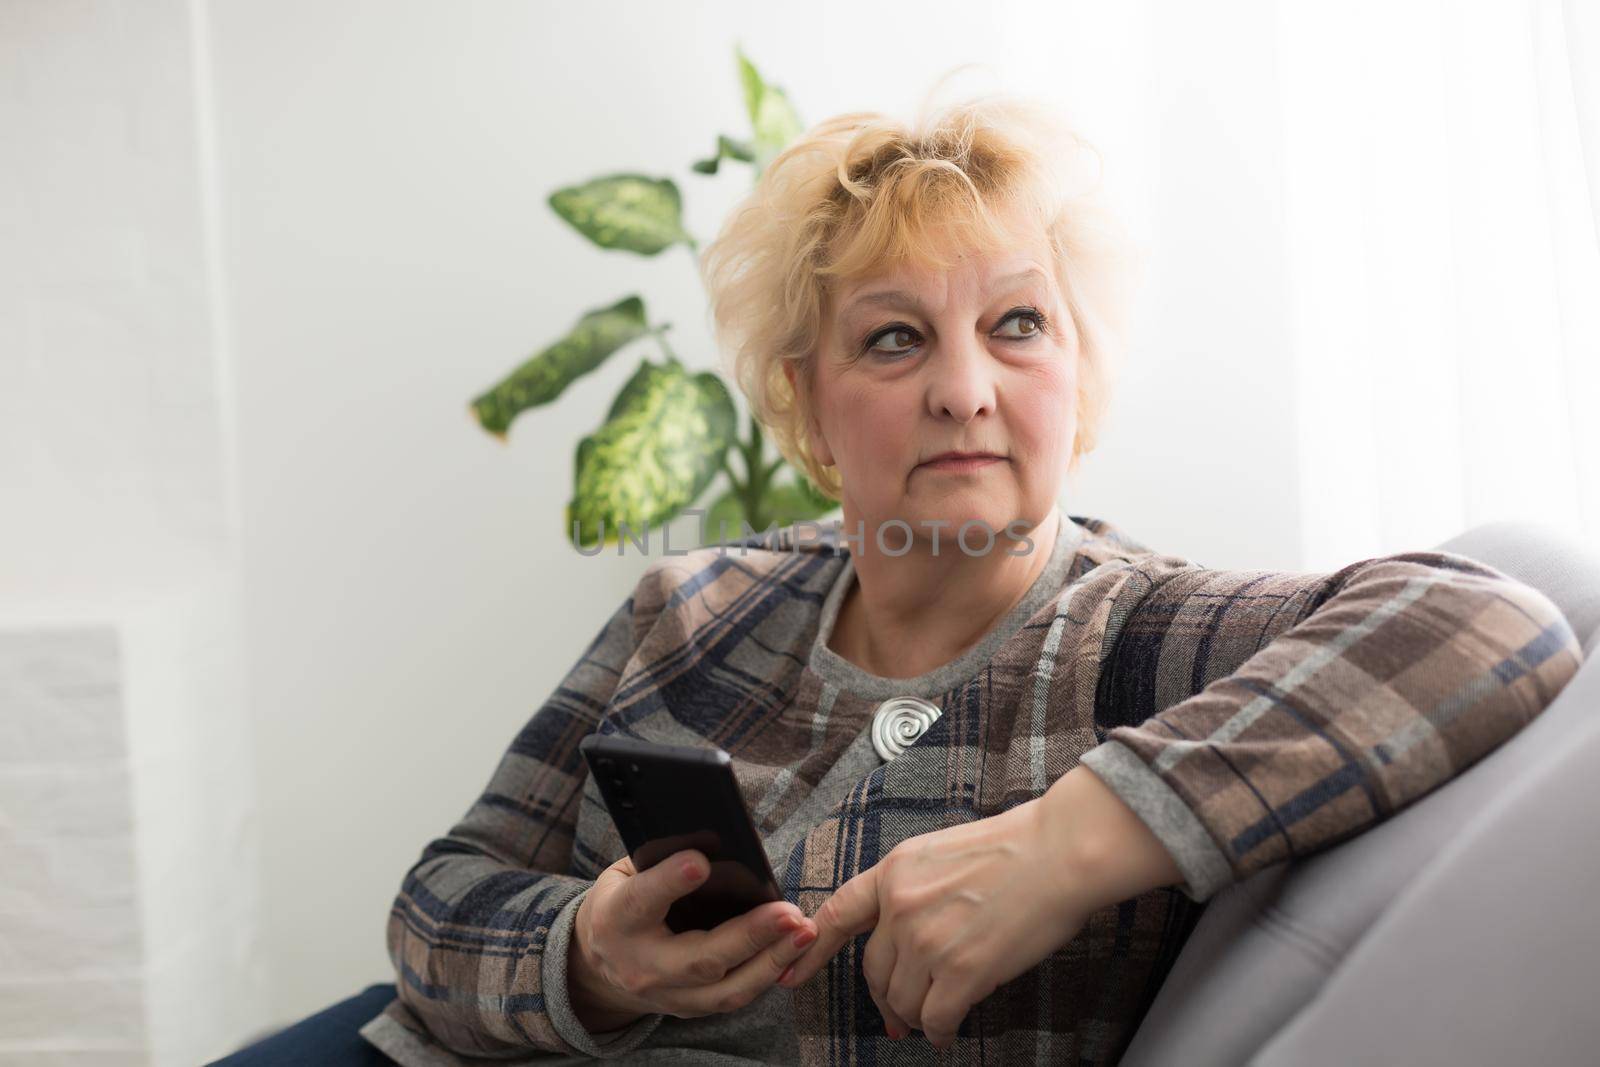 Concept of easy, fast usage of modern technology among all ages. Portrait of confident mature woman with wrinkles she is using her modern smartphone for sending a message isolated on gray background